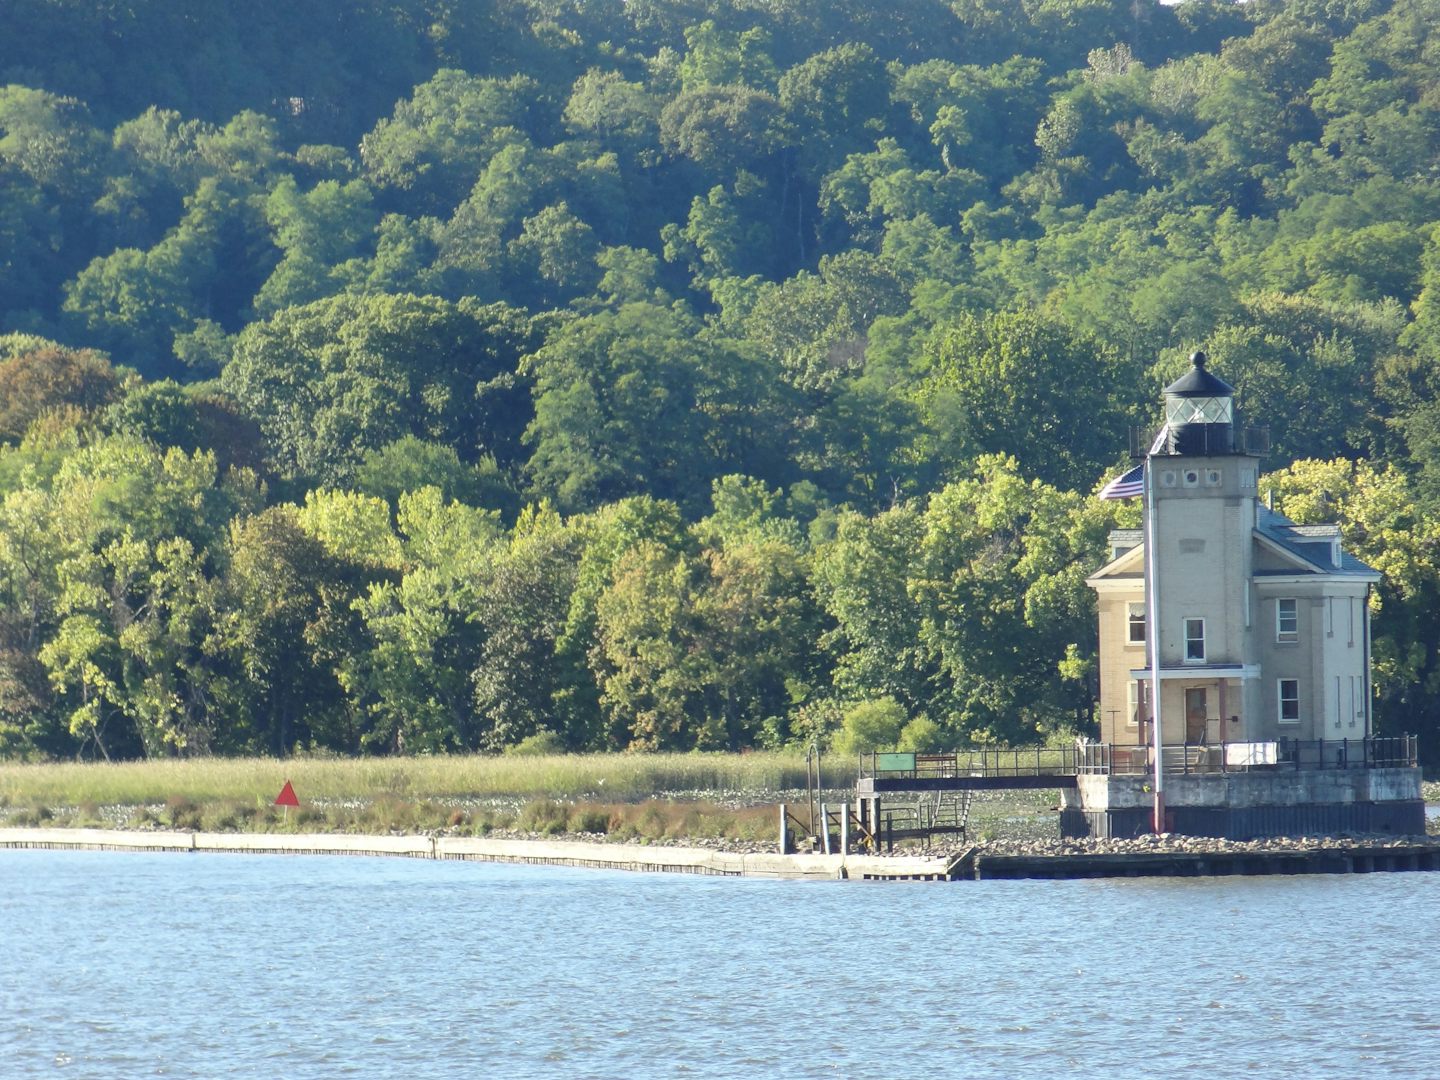 Peaceful and calming scenery along the Hudson